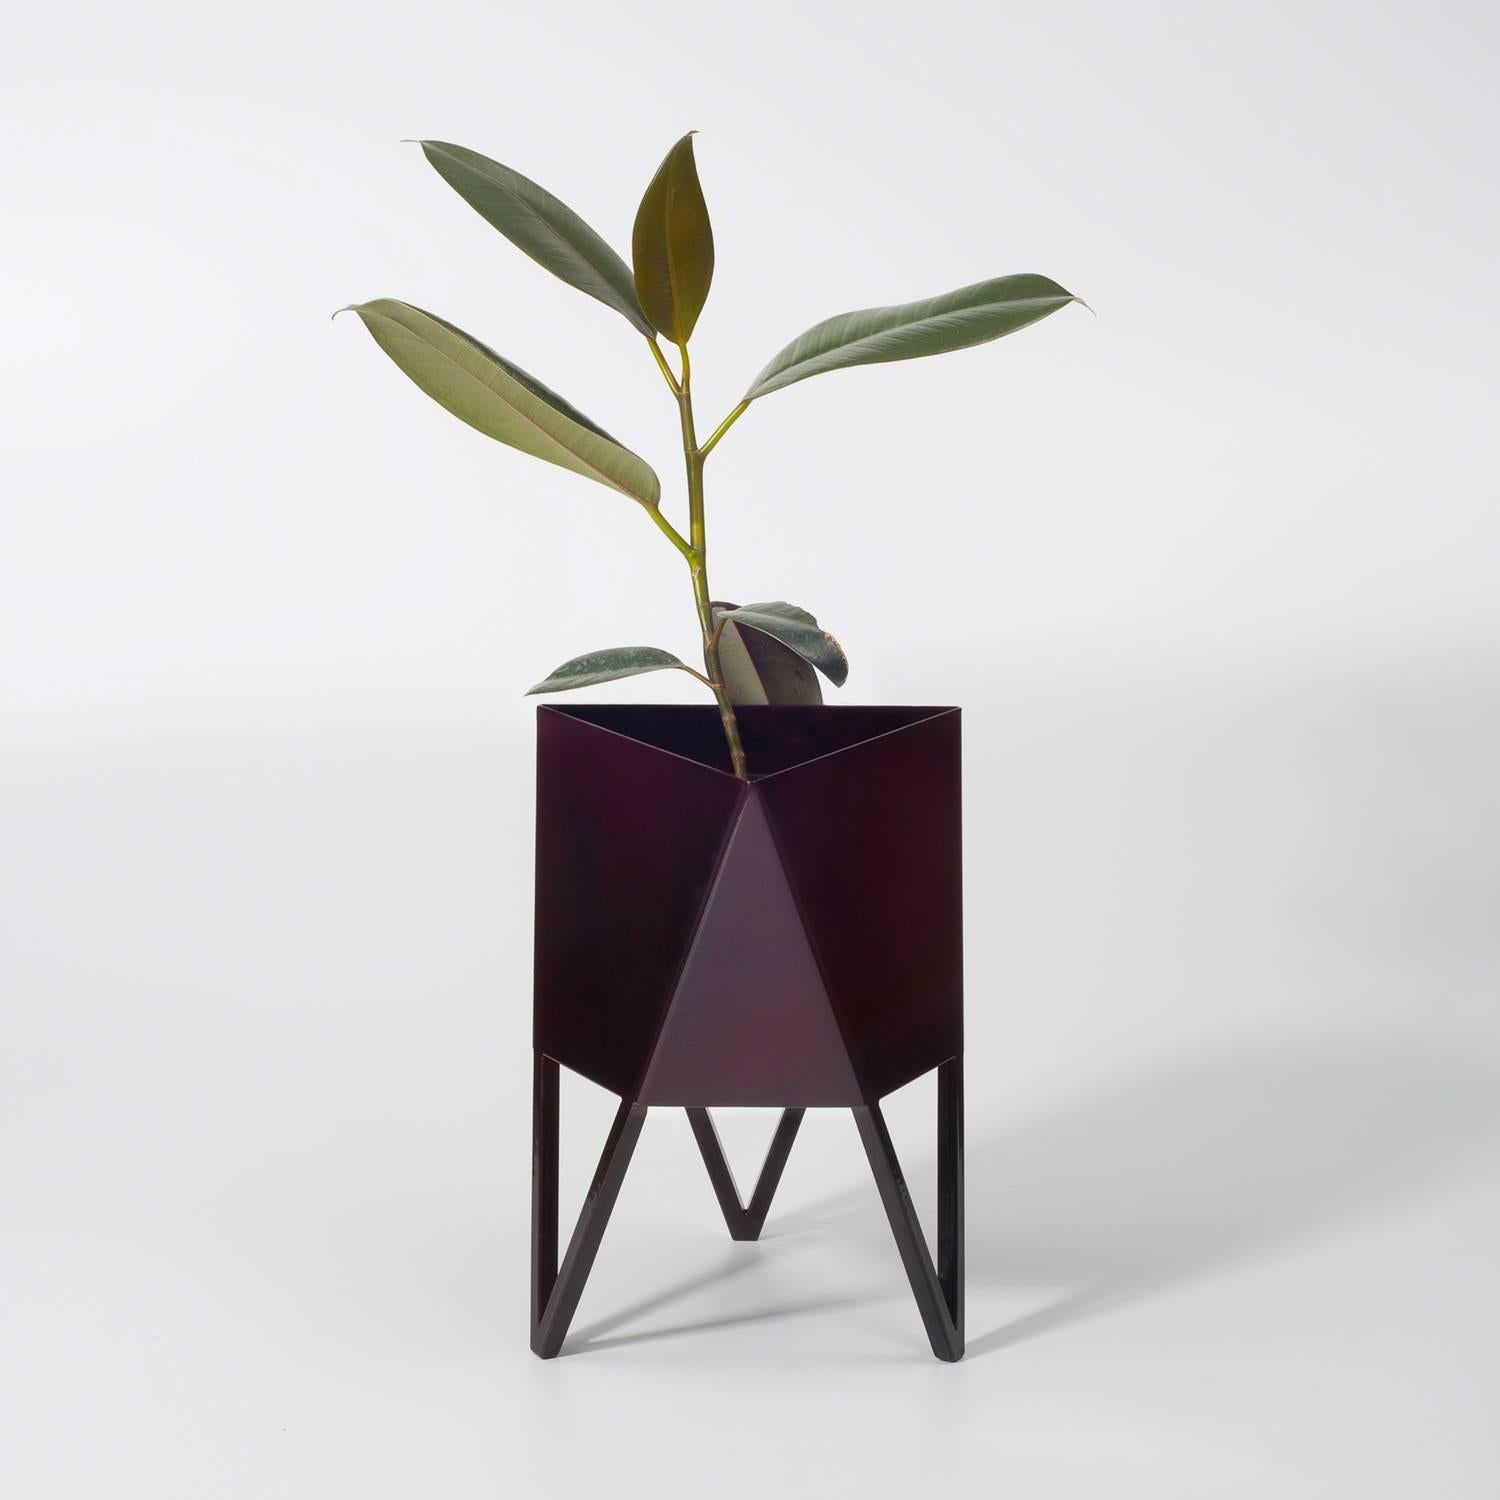 Deca Planter in Flat Black Steel, Small, by Force/Collide 2